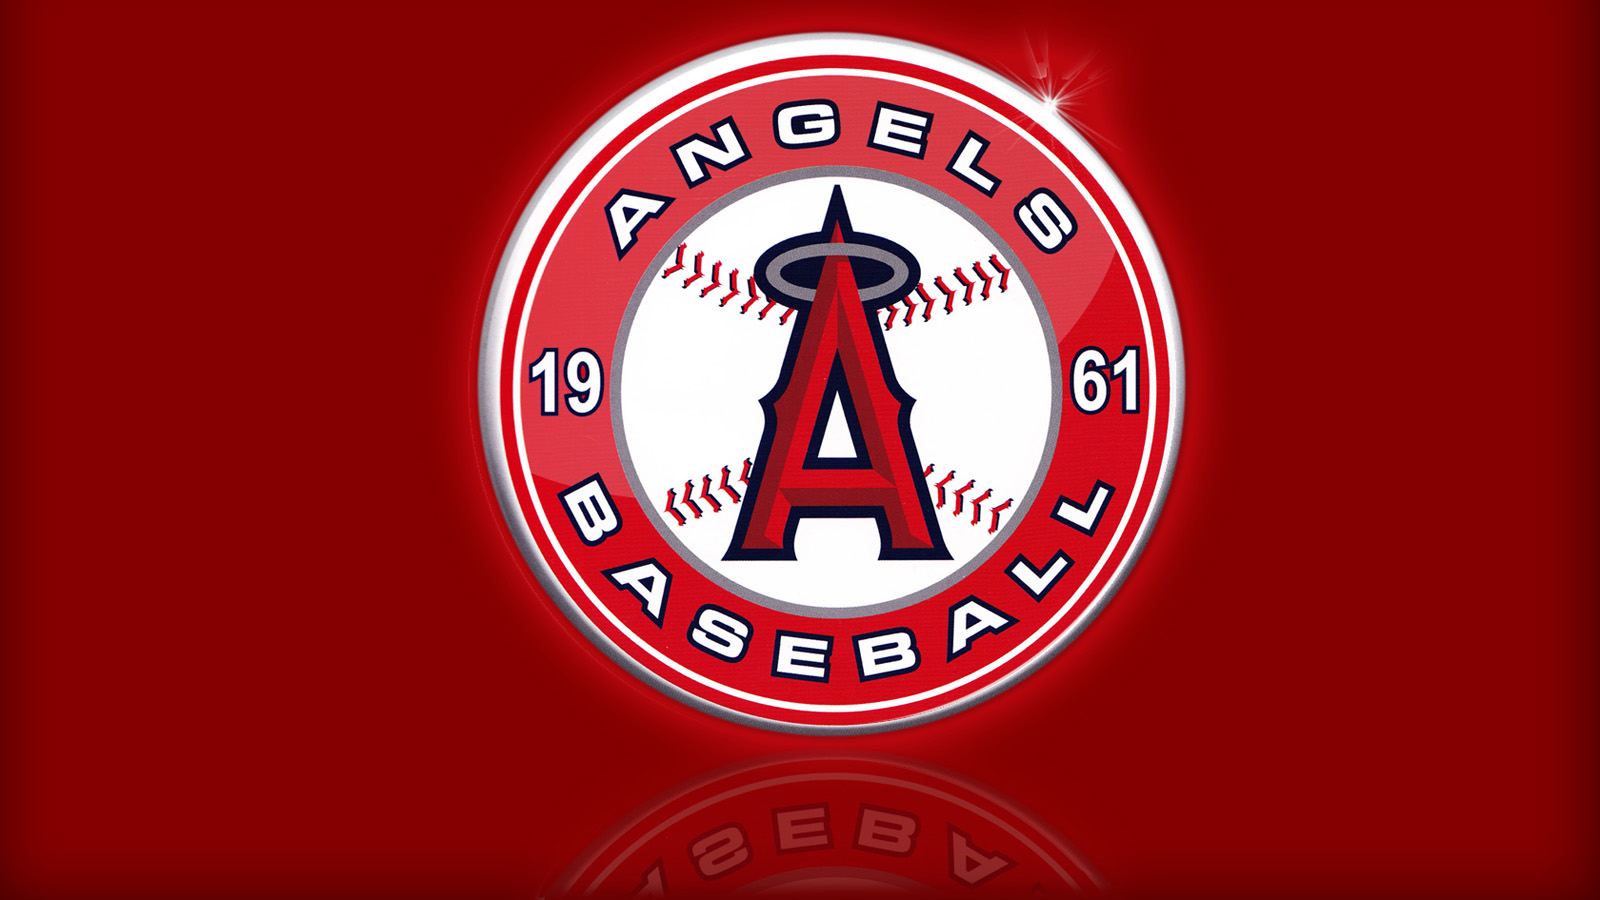 Los Angeles Angels of Anaheim wallpaper hd free download